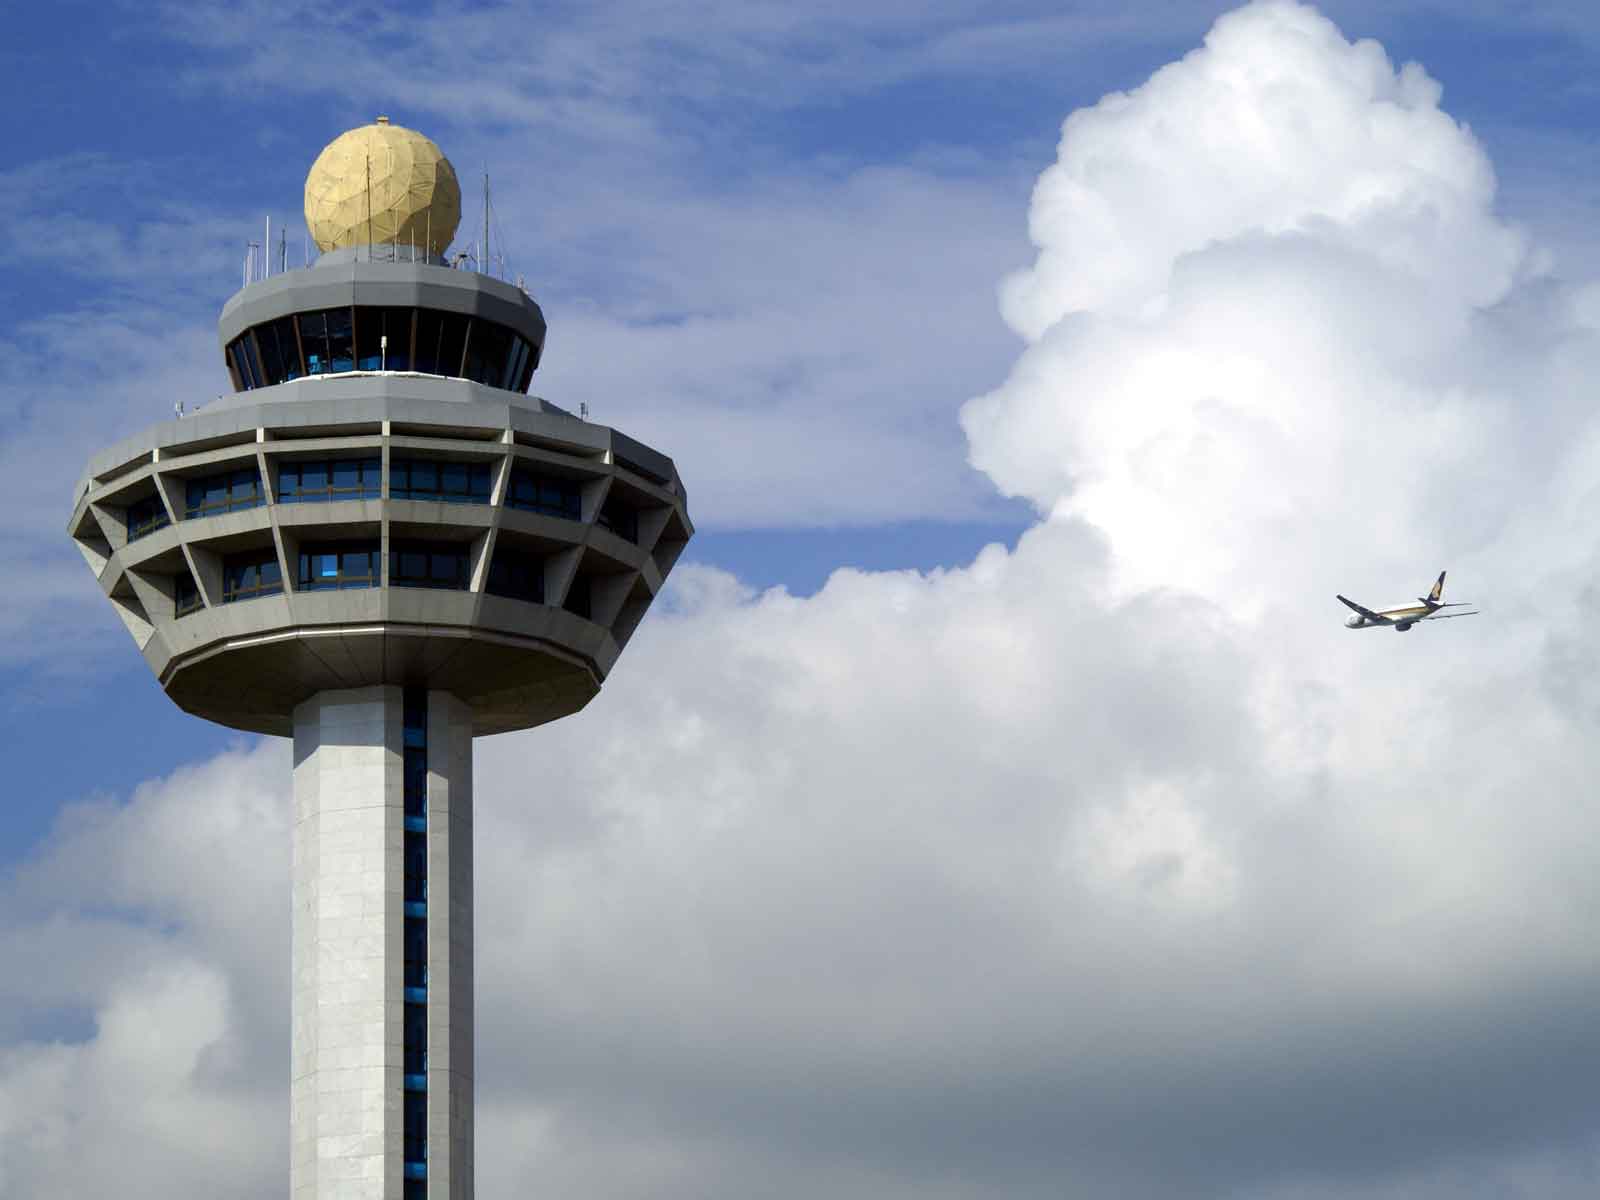 Company behind the Changi Airport, SATS Limited